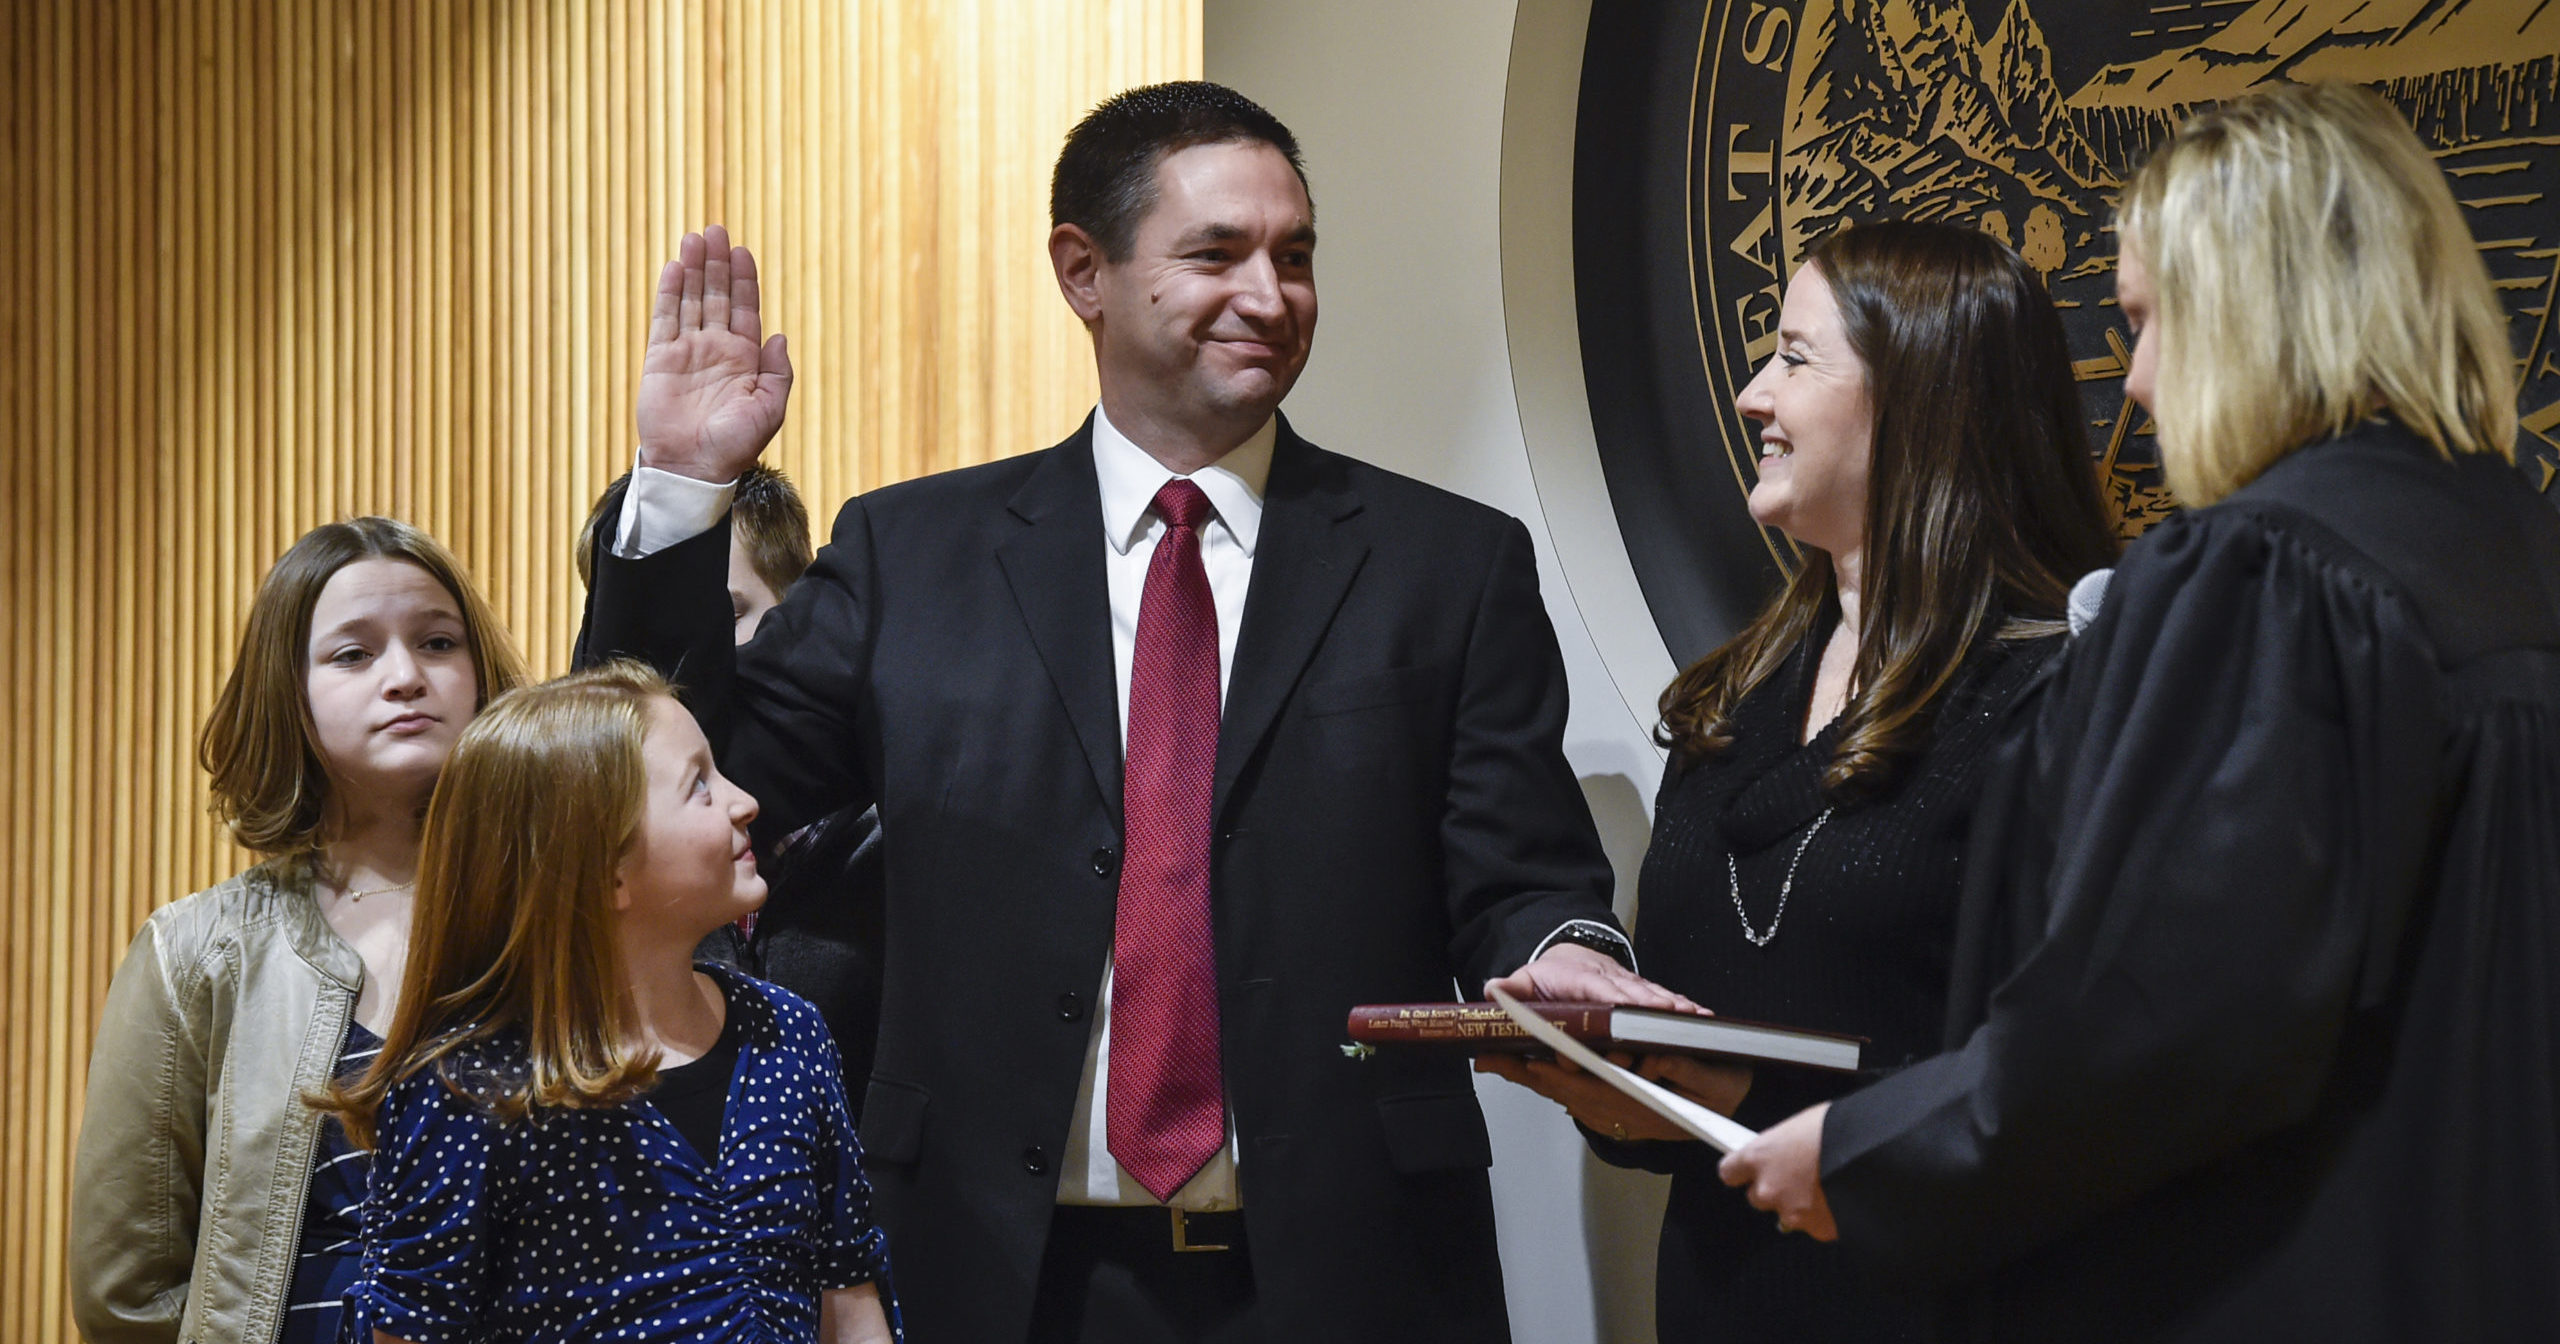 Montana Attorney General Austin Knudsen is sworn into office at the Montana State Capitol in Helena, Montana, on Jan. 4, 2021.